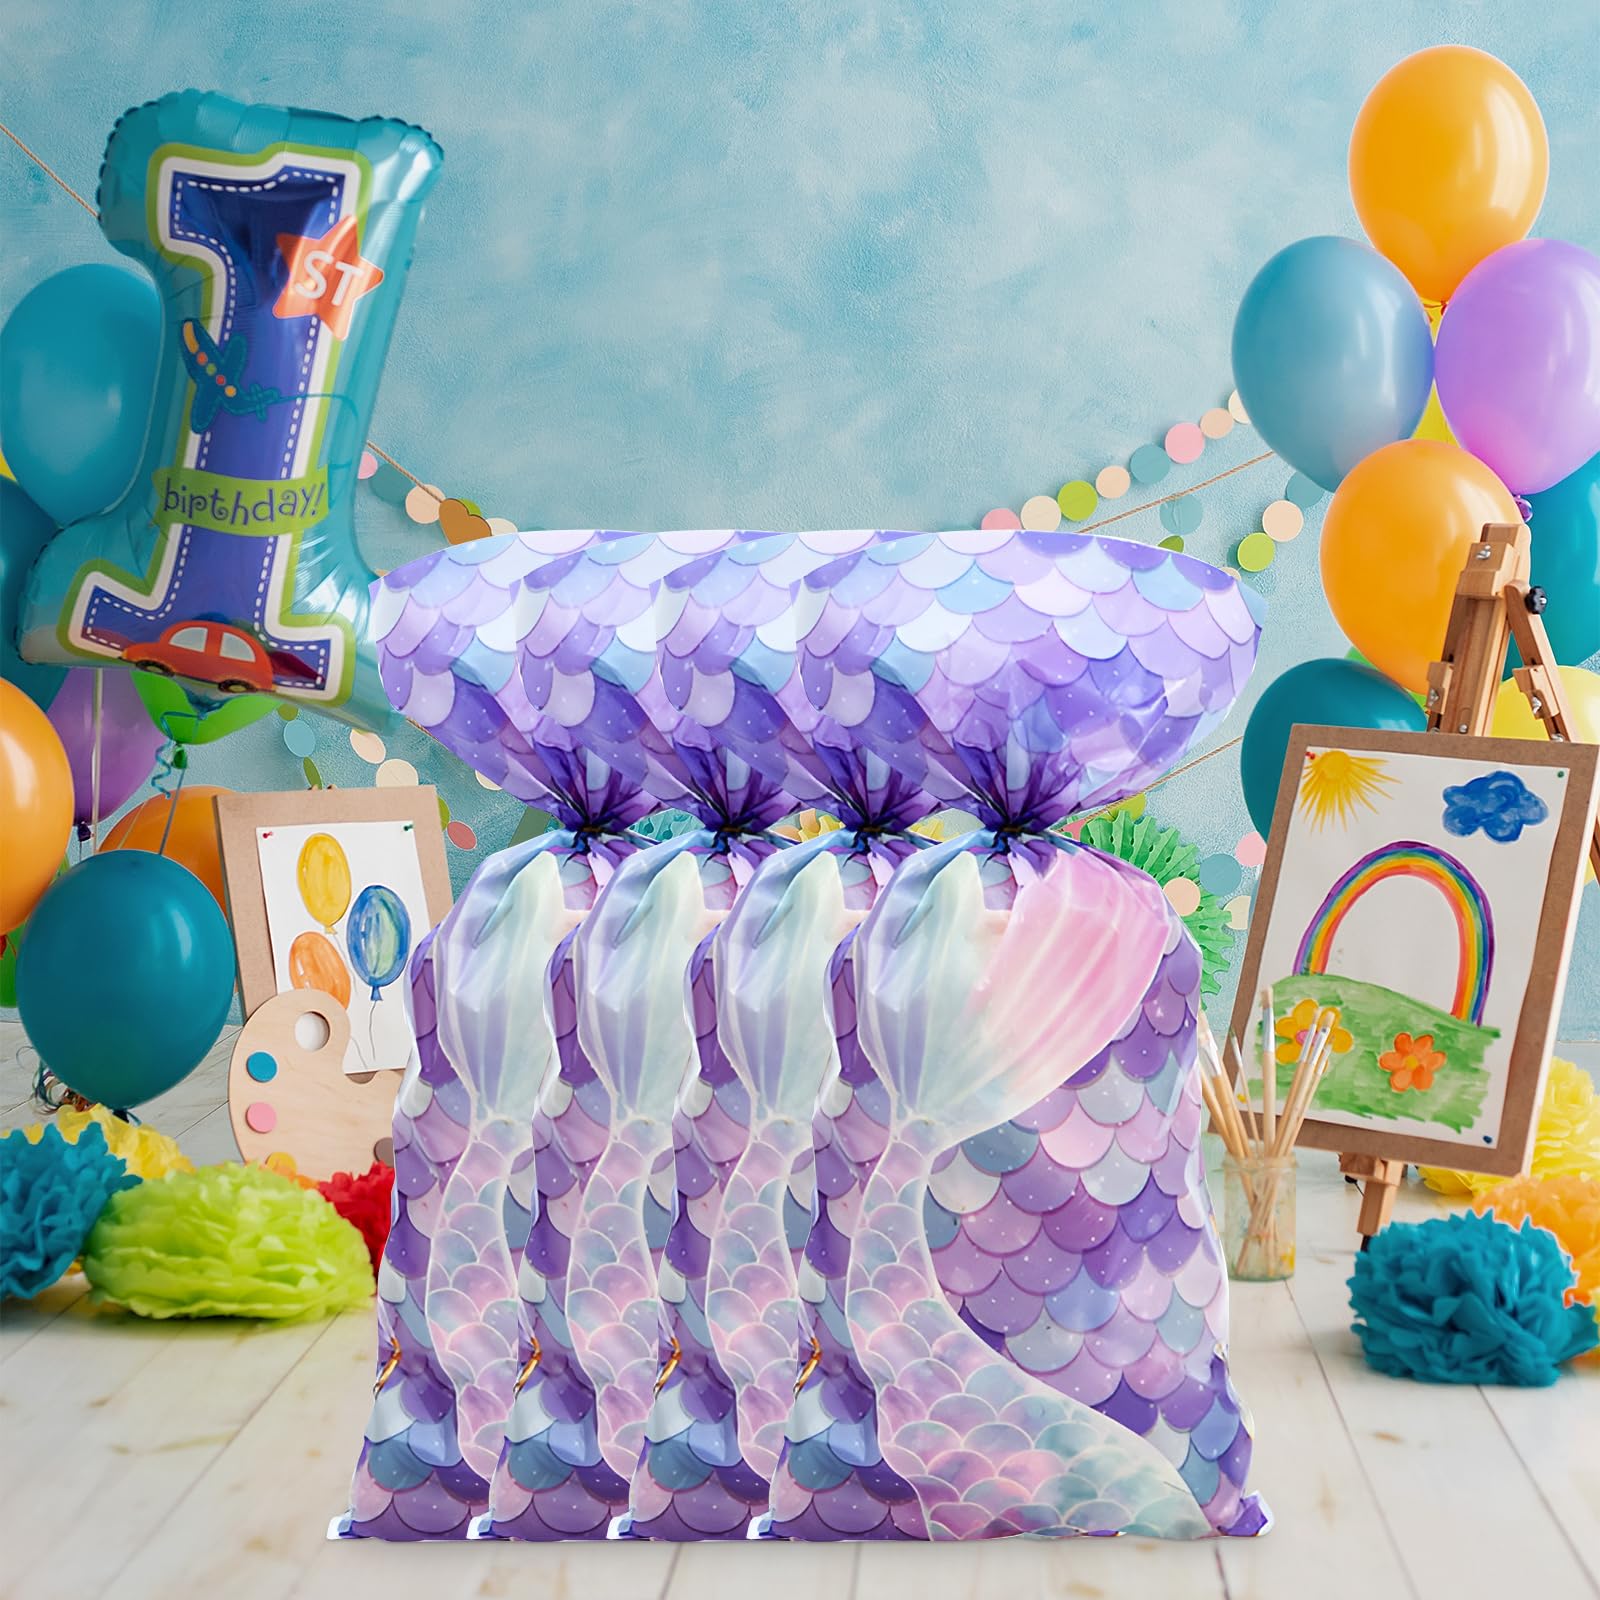 mciskin Personalized Mermaid Gift Wrap Cellophane Bags for Mermaid Theme Party Small Empty Bags Mermaid Tail Goodie Bag Candy Bag Cookies Treat Bags with Ties for Birthday Wedding Party Decorations